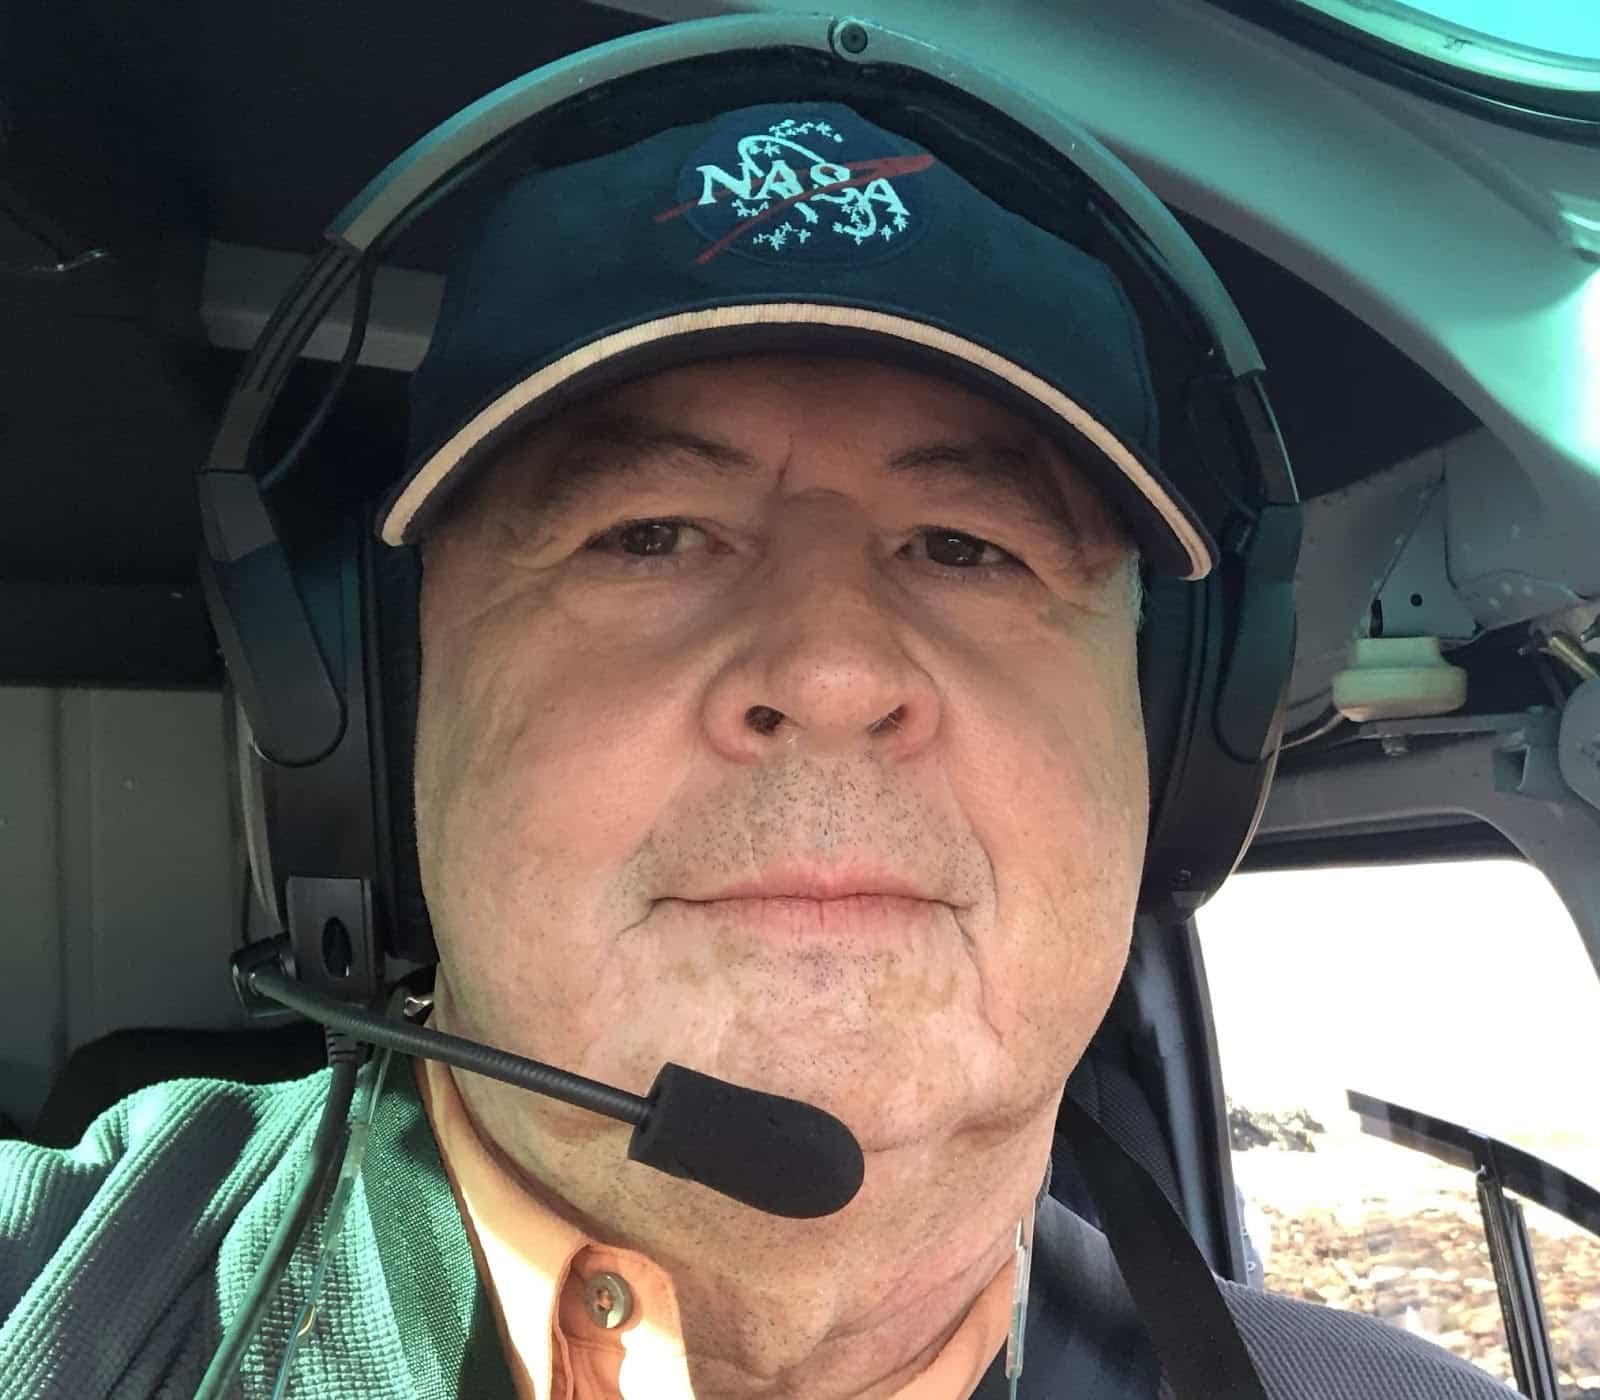 Headshot of Don sitting in a cockpit wearing a NASA hat and a communication headset.